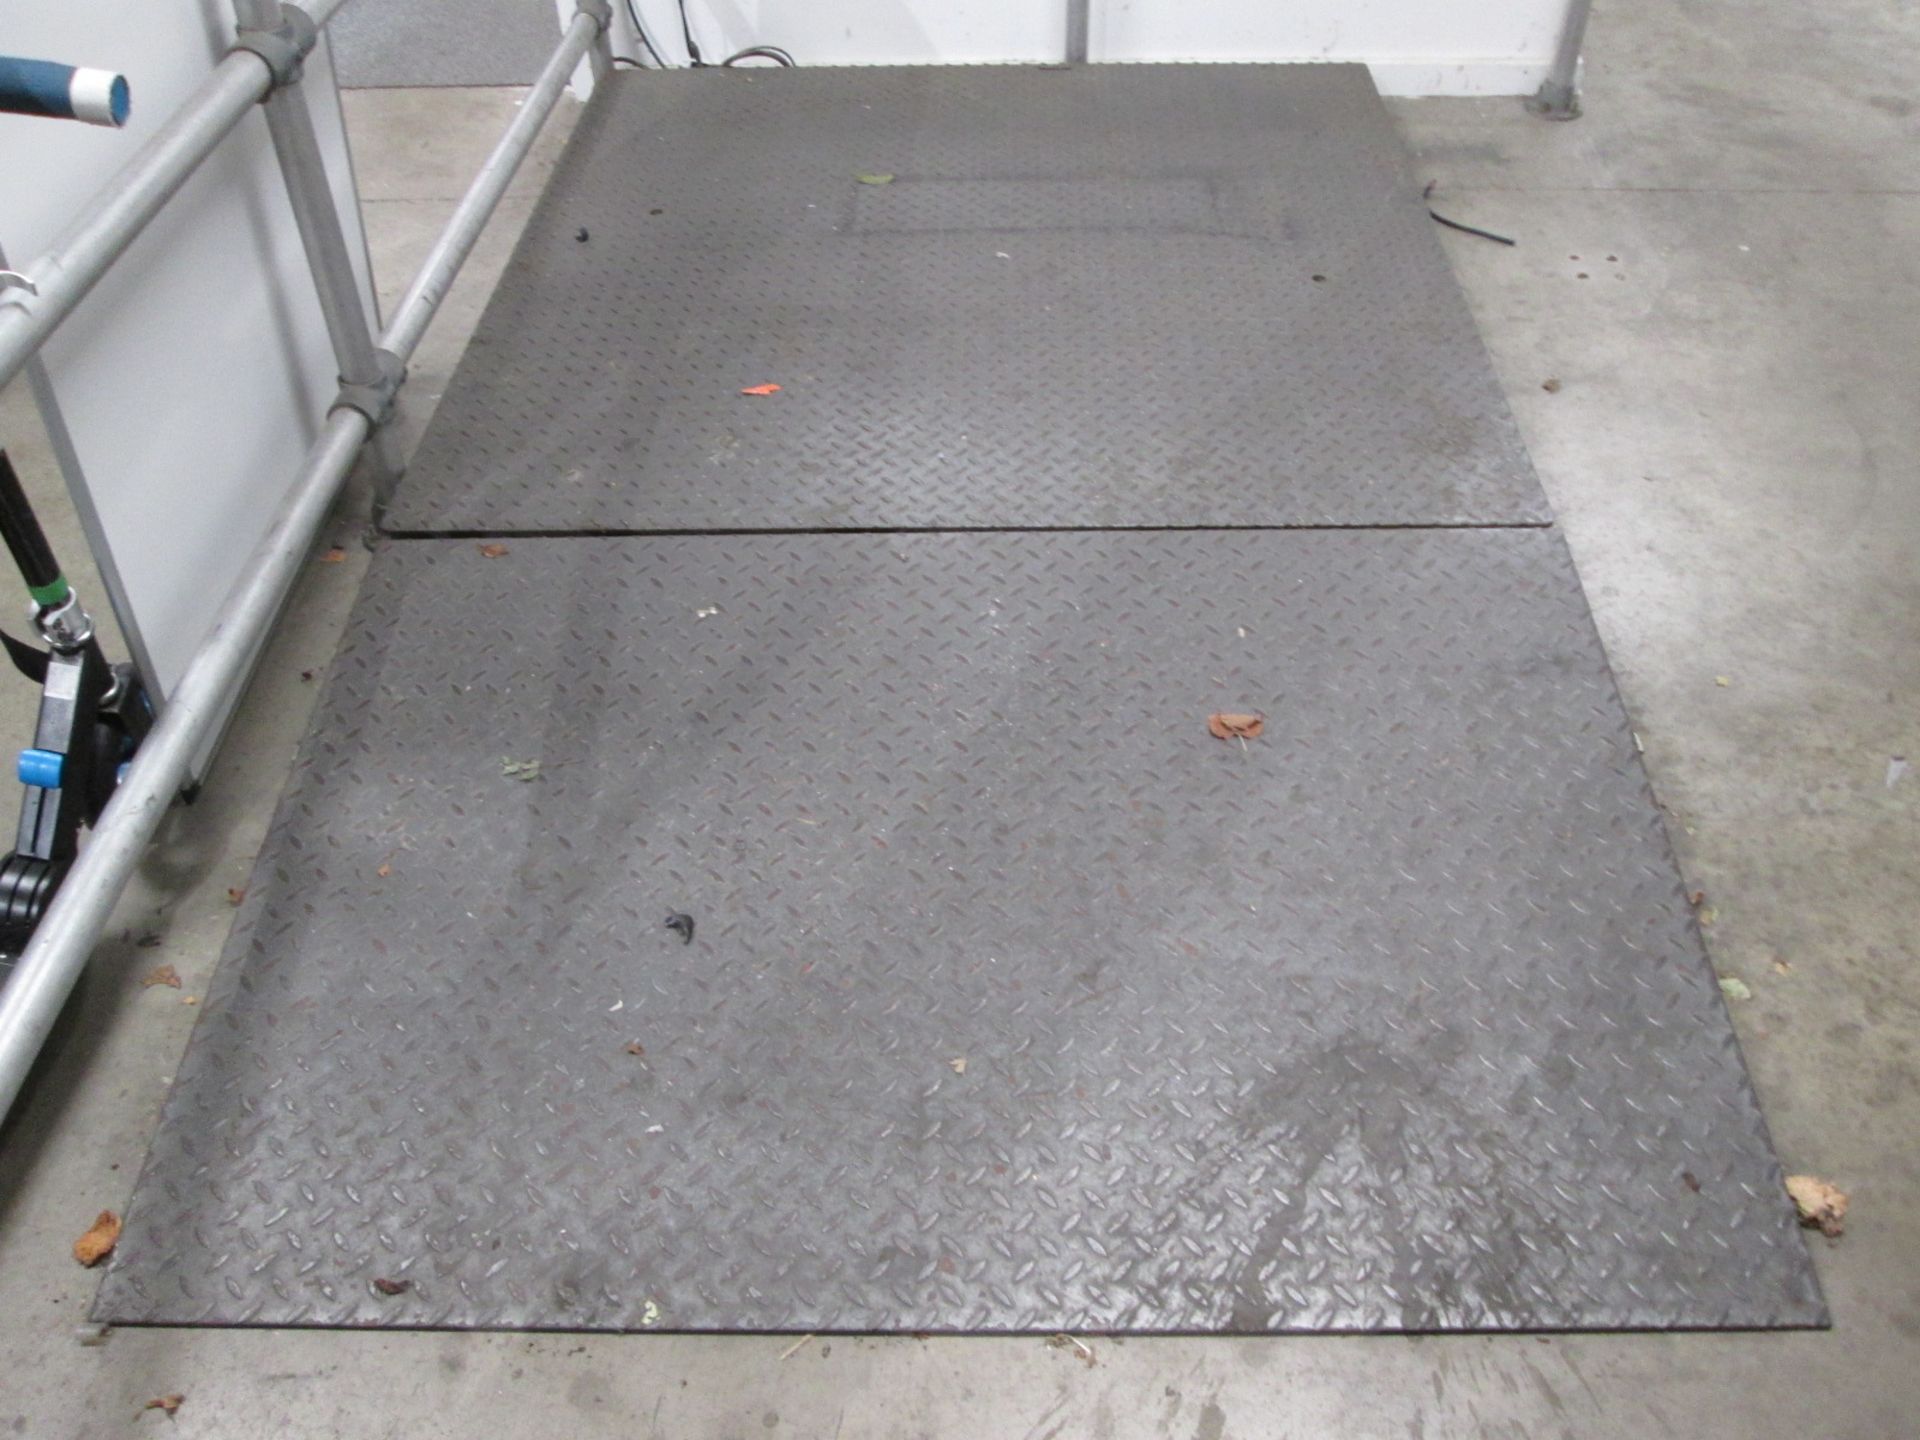 Avery Weigh-Tronix Platform Weigh Scale with Loading Ramp, Max capacity 2000 kg, e=0.1, L126 digital - Image 2 of 4